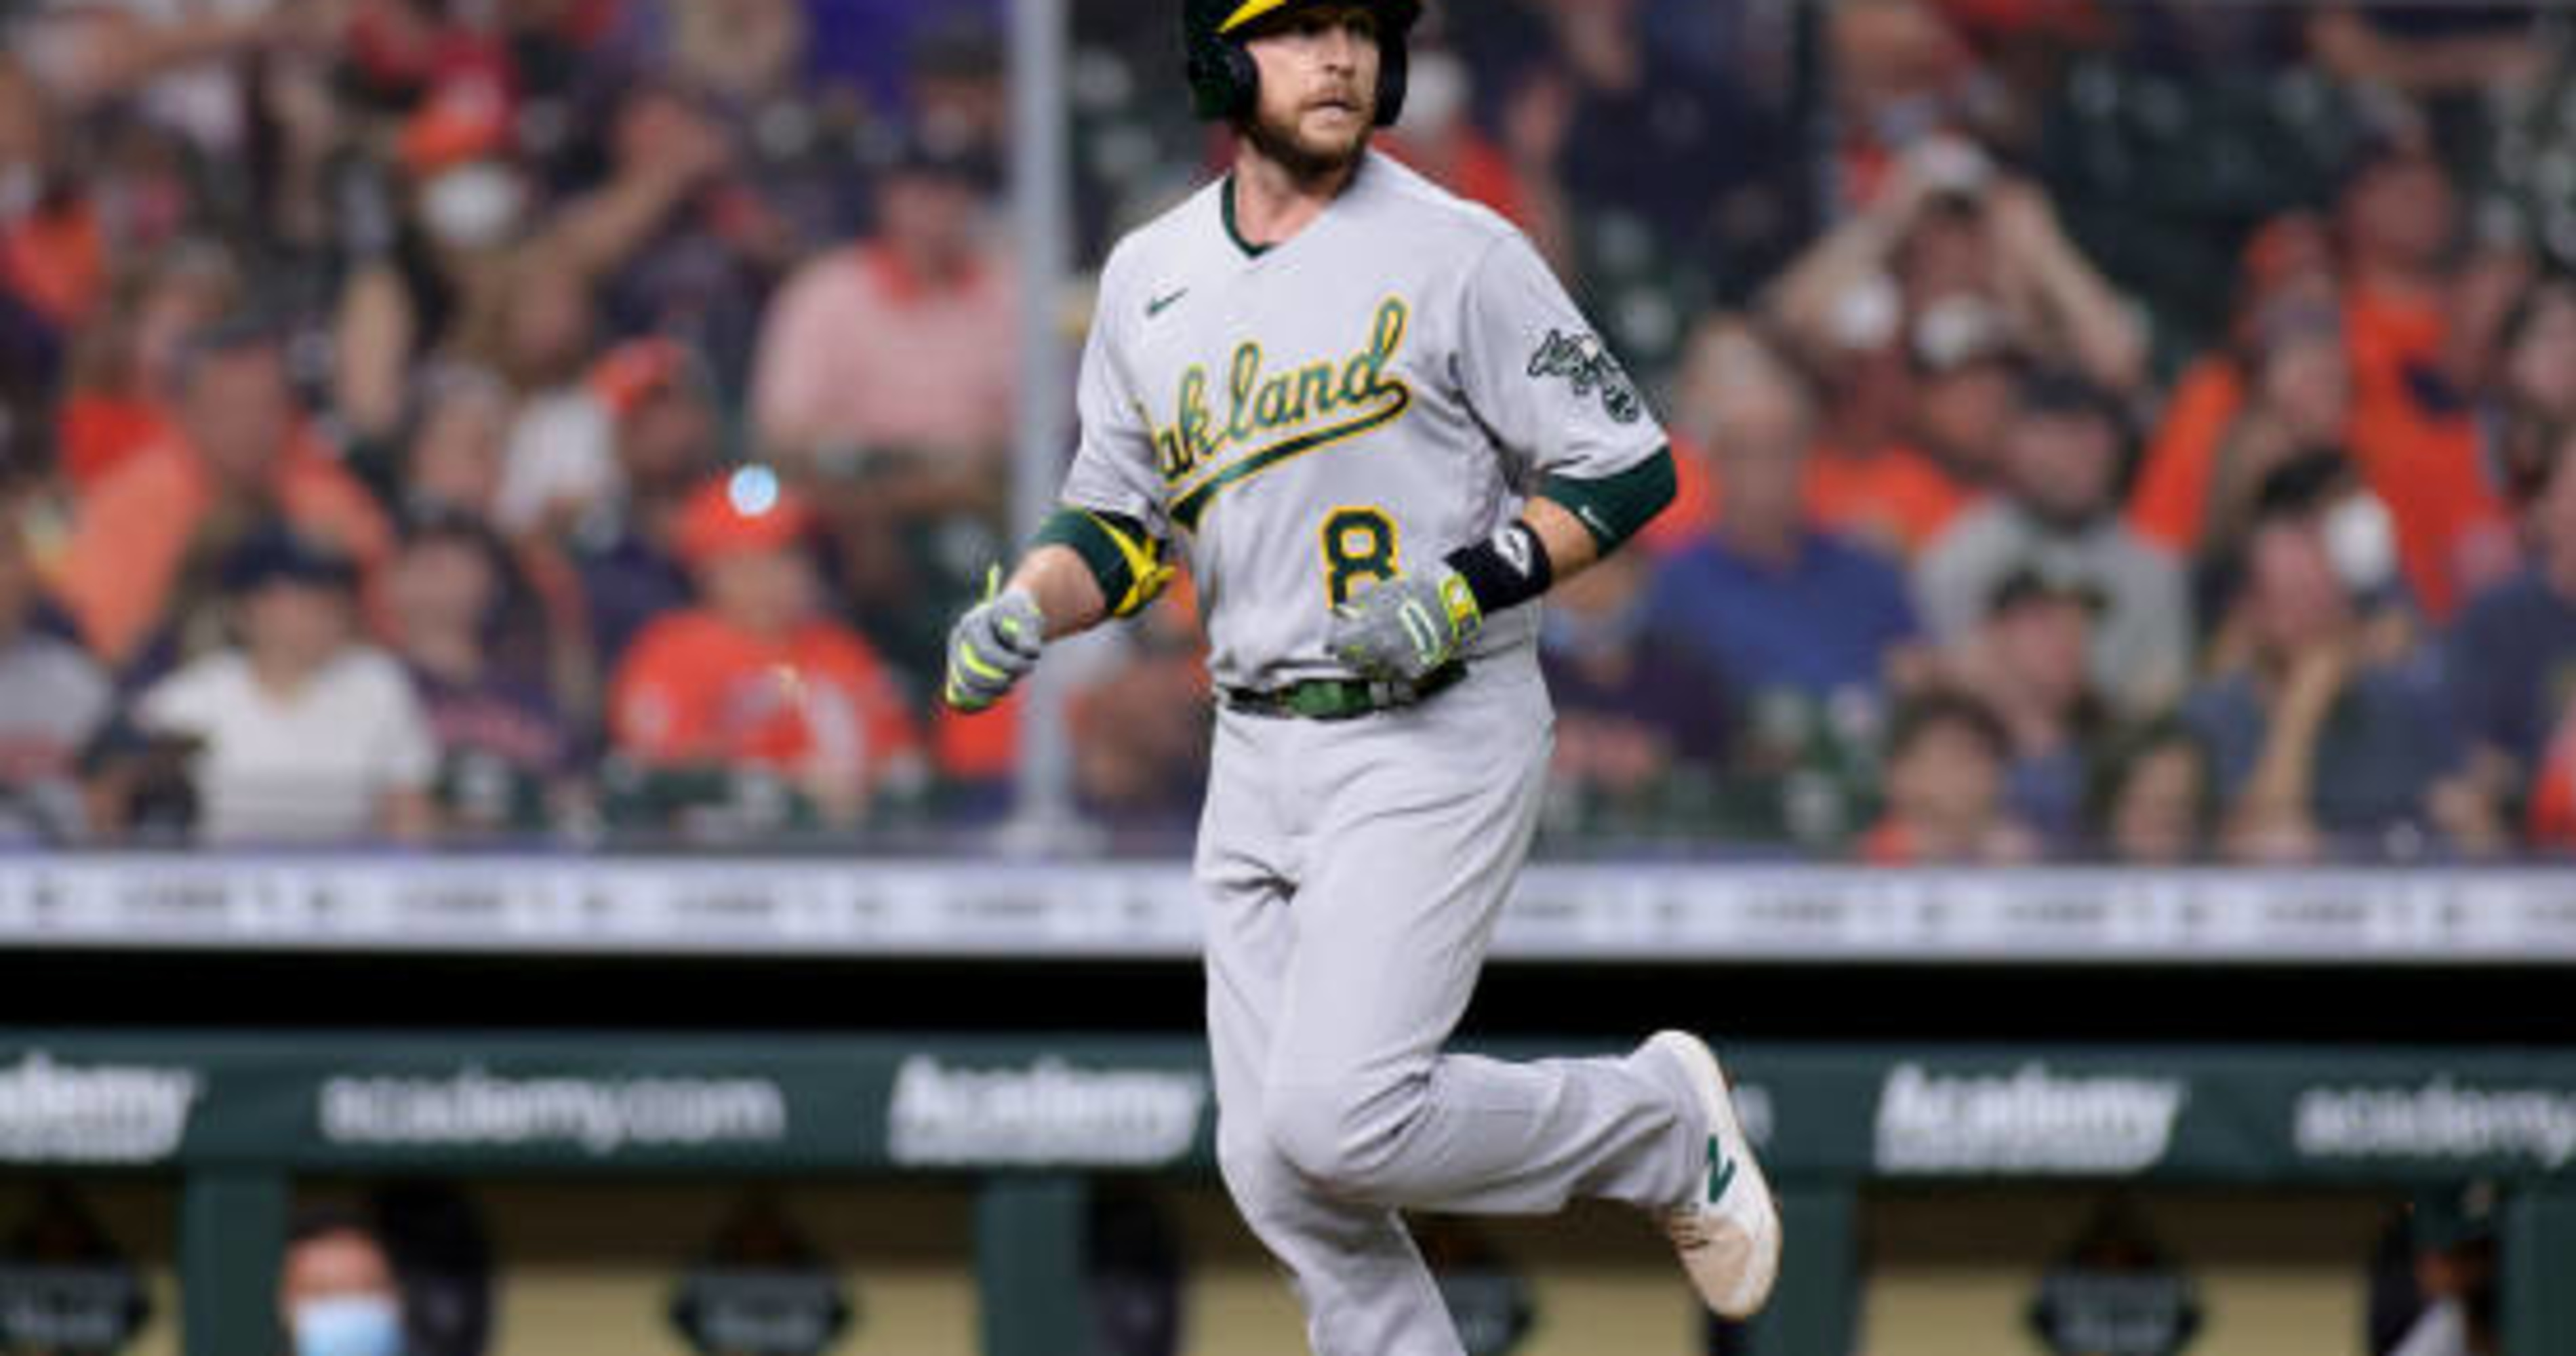 Jed Lowrie: The Met We Hardly Saw in 2019 (2019-2020)